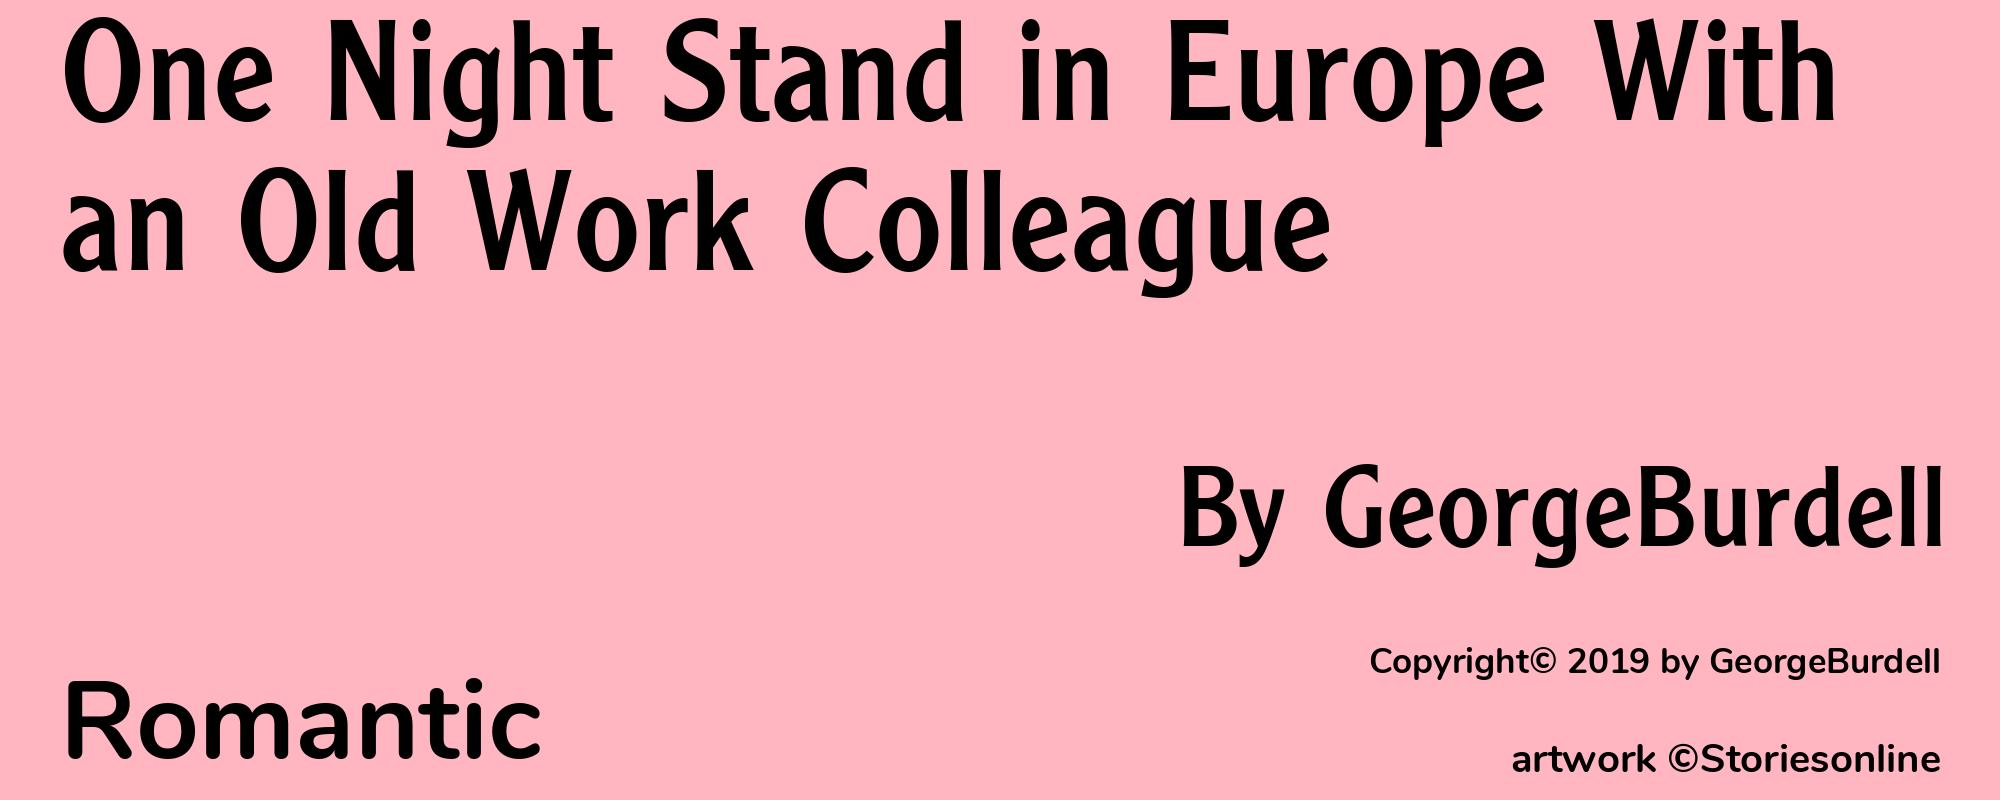 One Night Stand in Europe With an Old Work Colleague - Cover